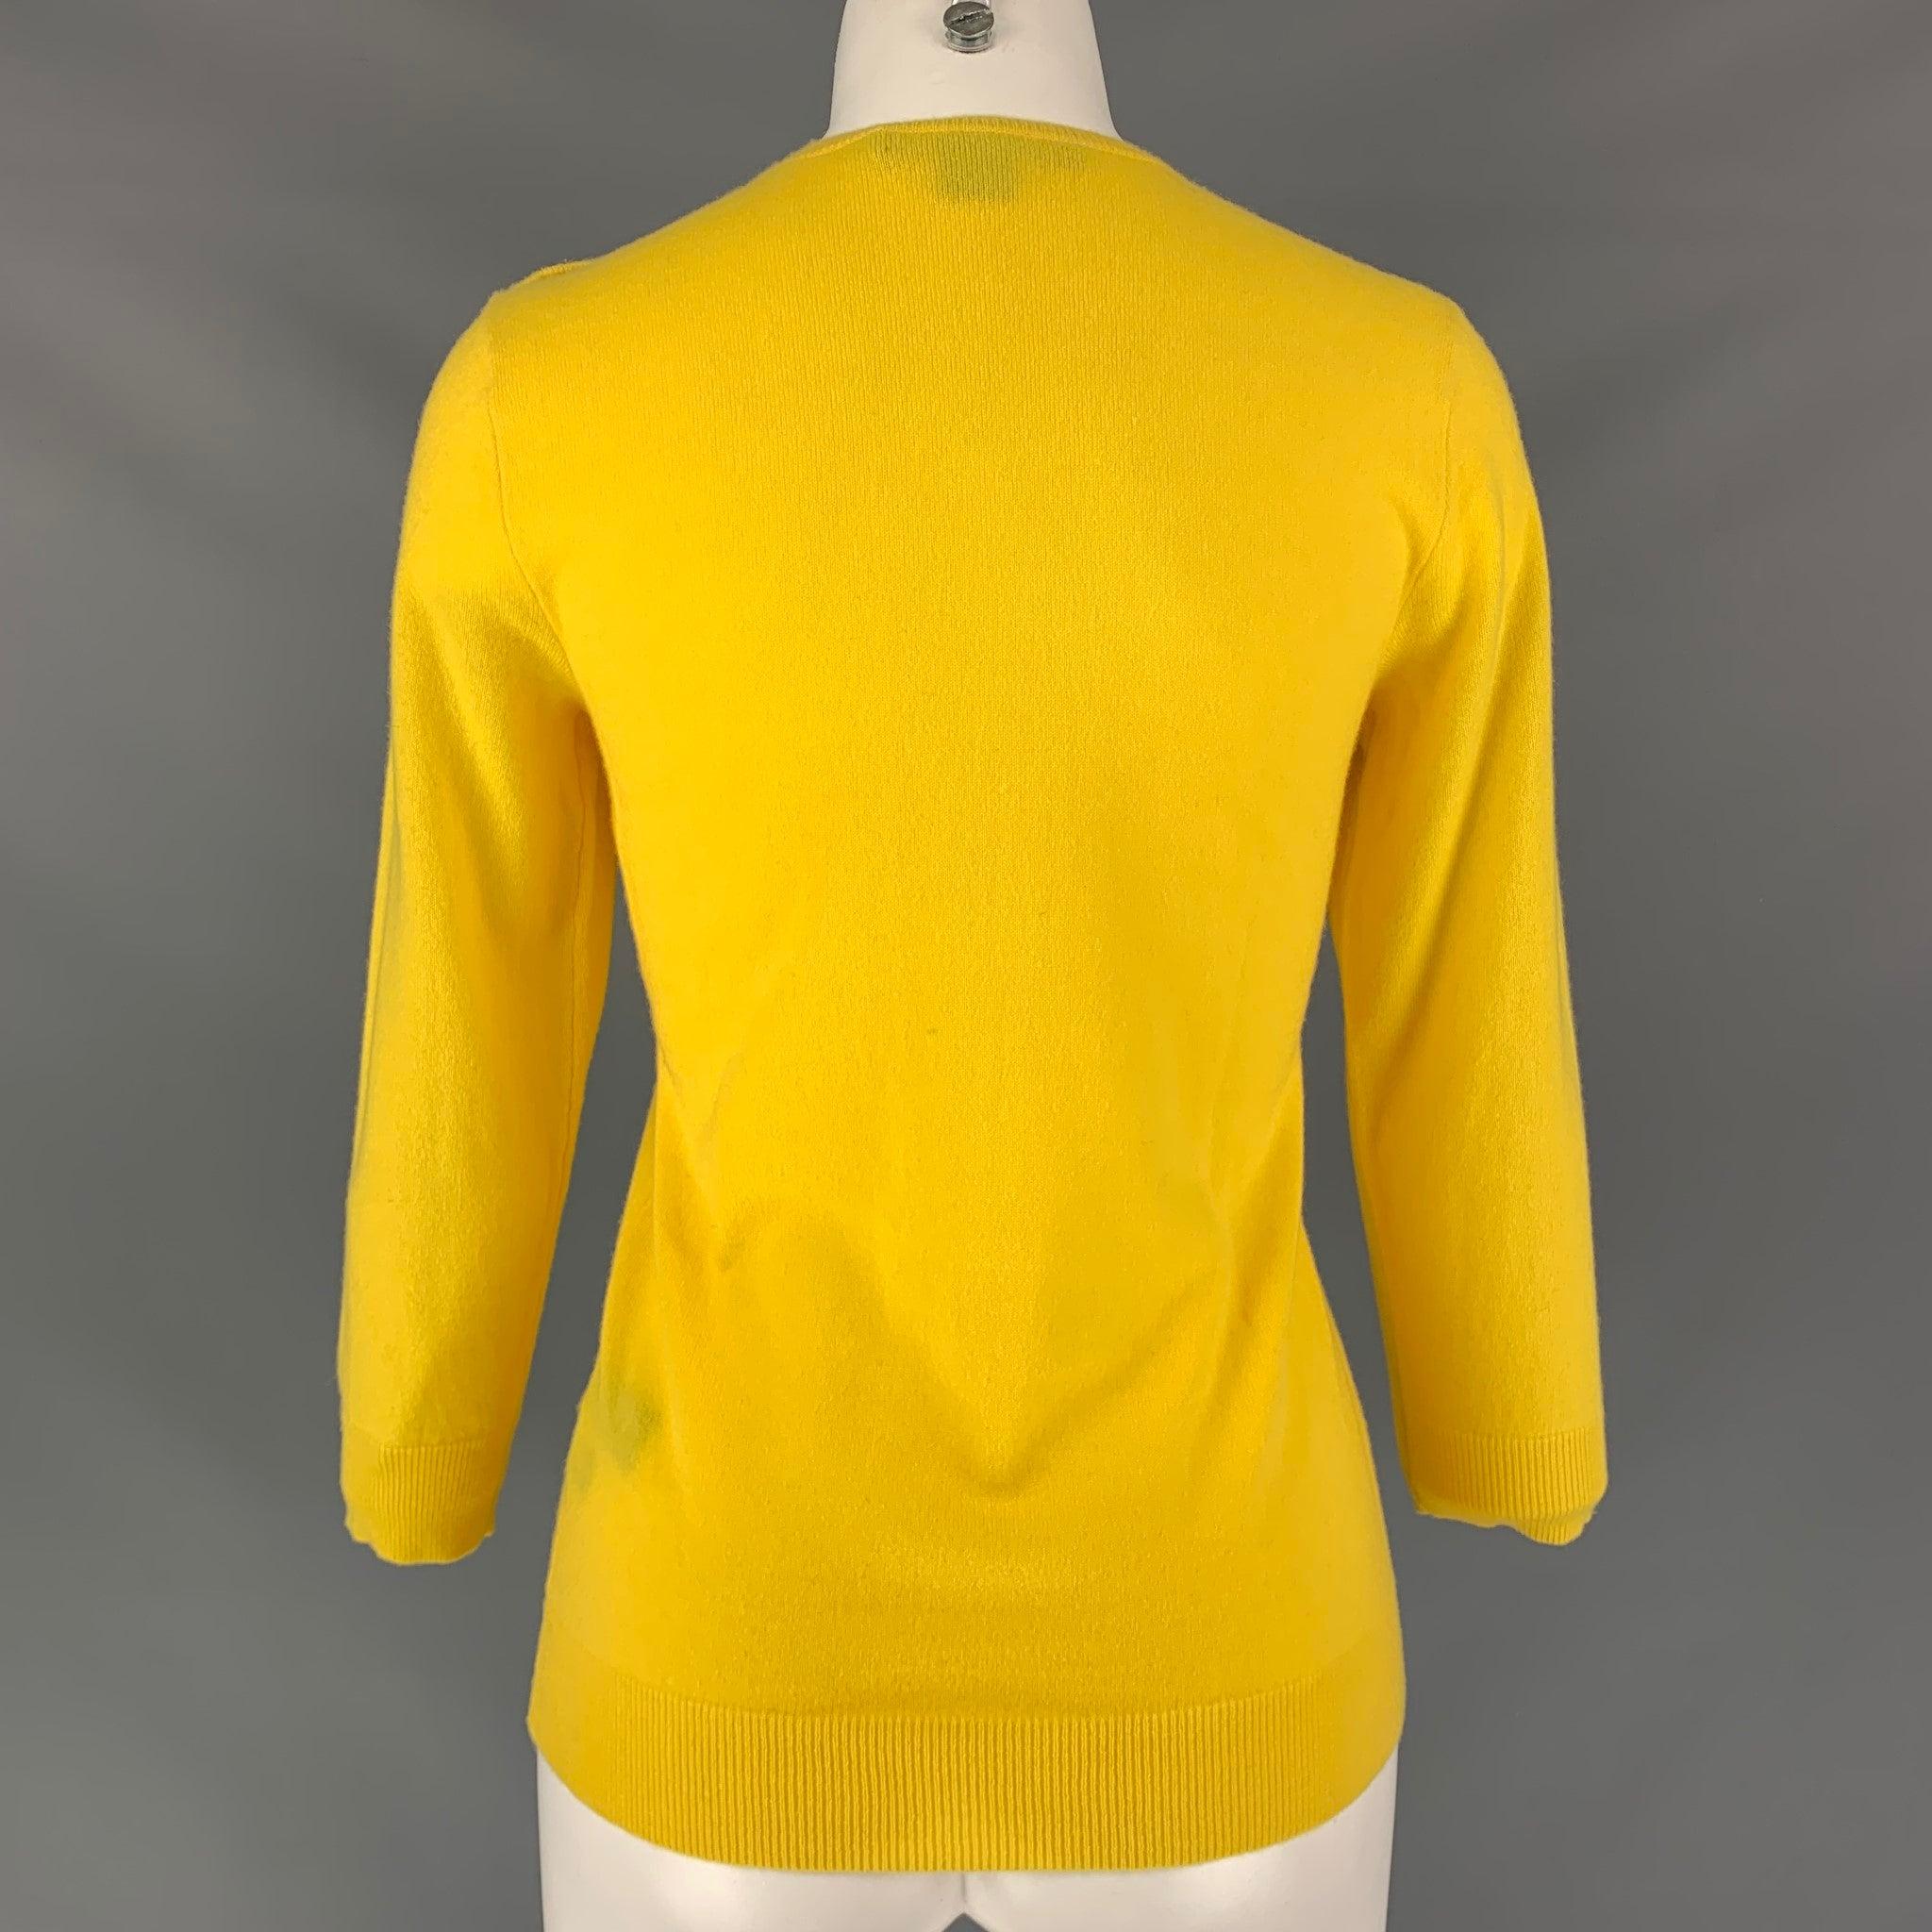 RALPH LAUREN Cashmere Knitted Size M Yellow Pullover In Excellent Condition For Sale In San Francisco, CA